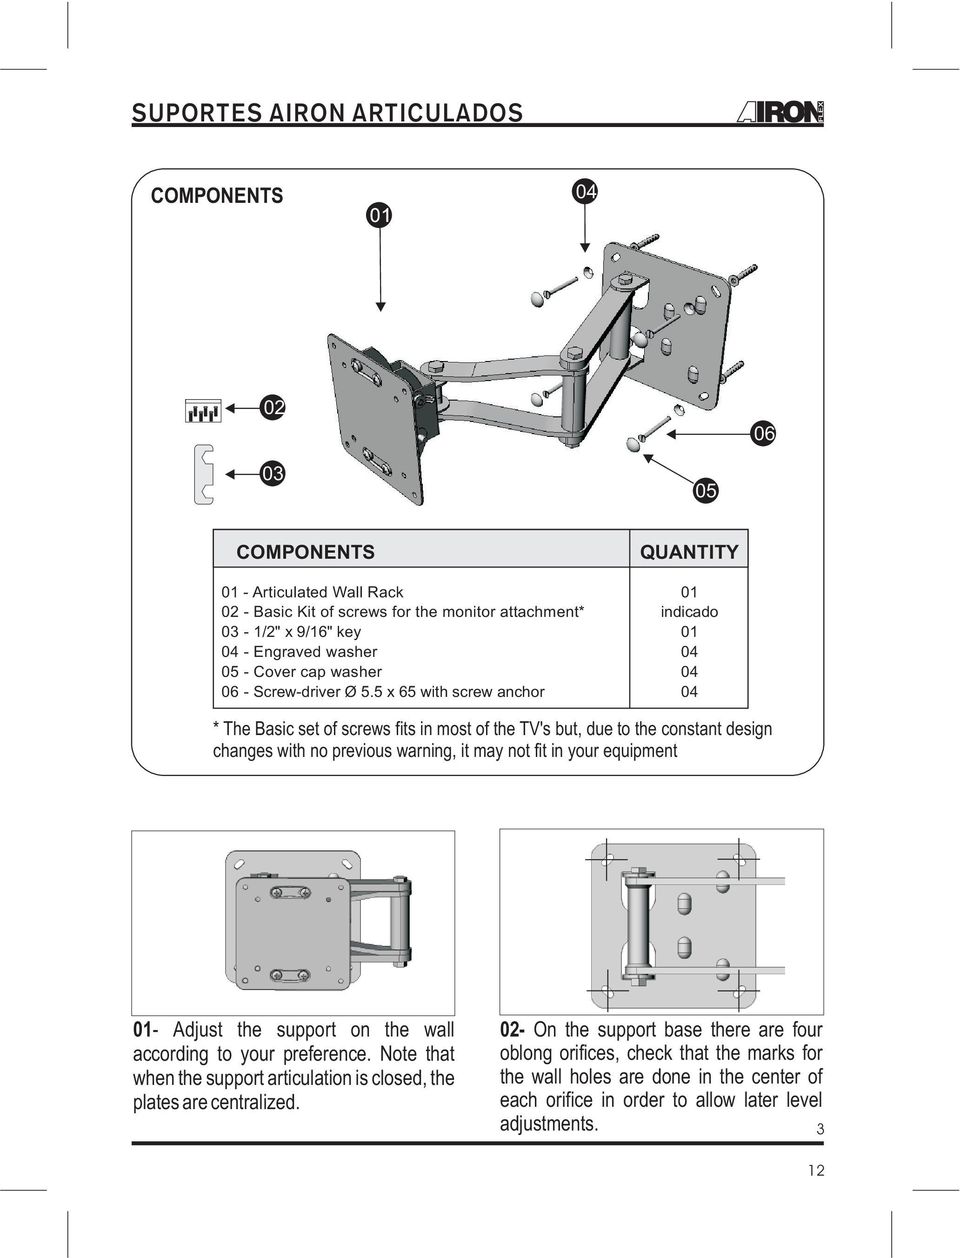 5 x 65 with screw anchor QUANTITY indicado * The Basic set of screws fits in most of the TV's but, due to the constant design changes with no previous warning, it may not fit in